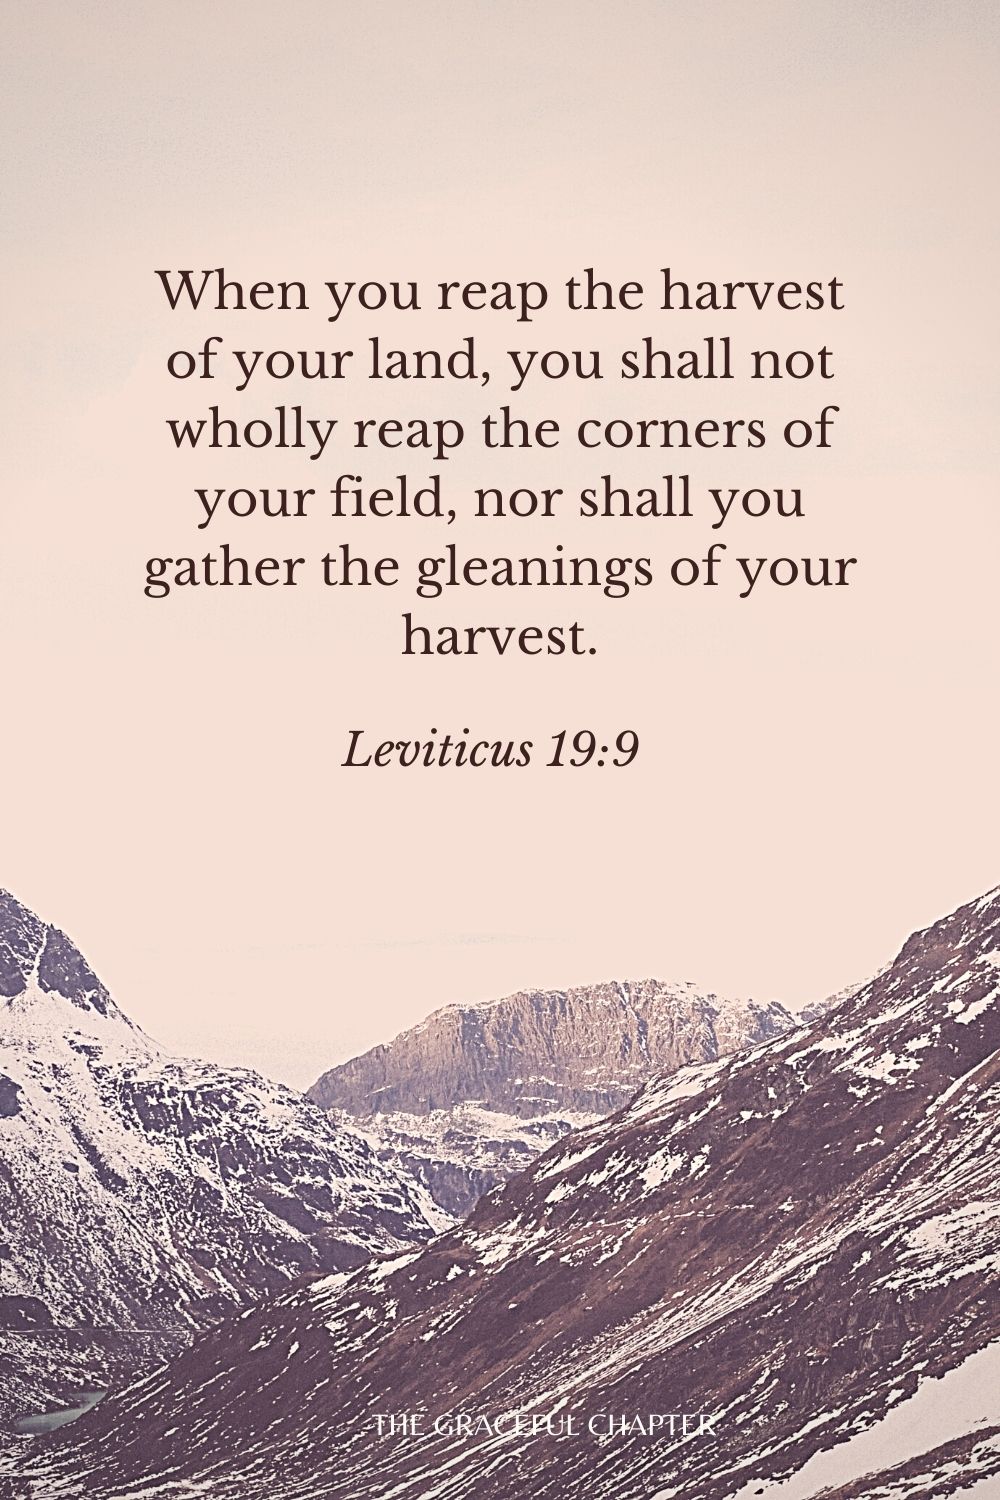 When you reap the harvest of your land, you shall not wholly reap the corners of your field, nor shall you gather the gleanings of your harvest. Leviticus 19:9